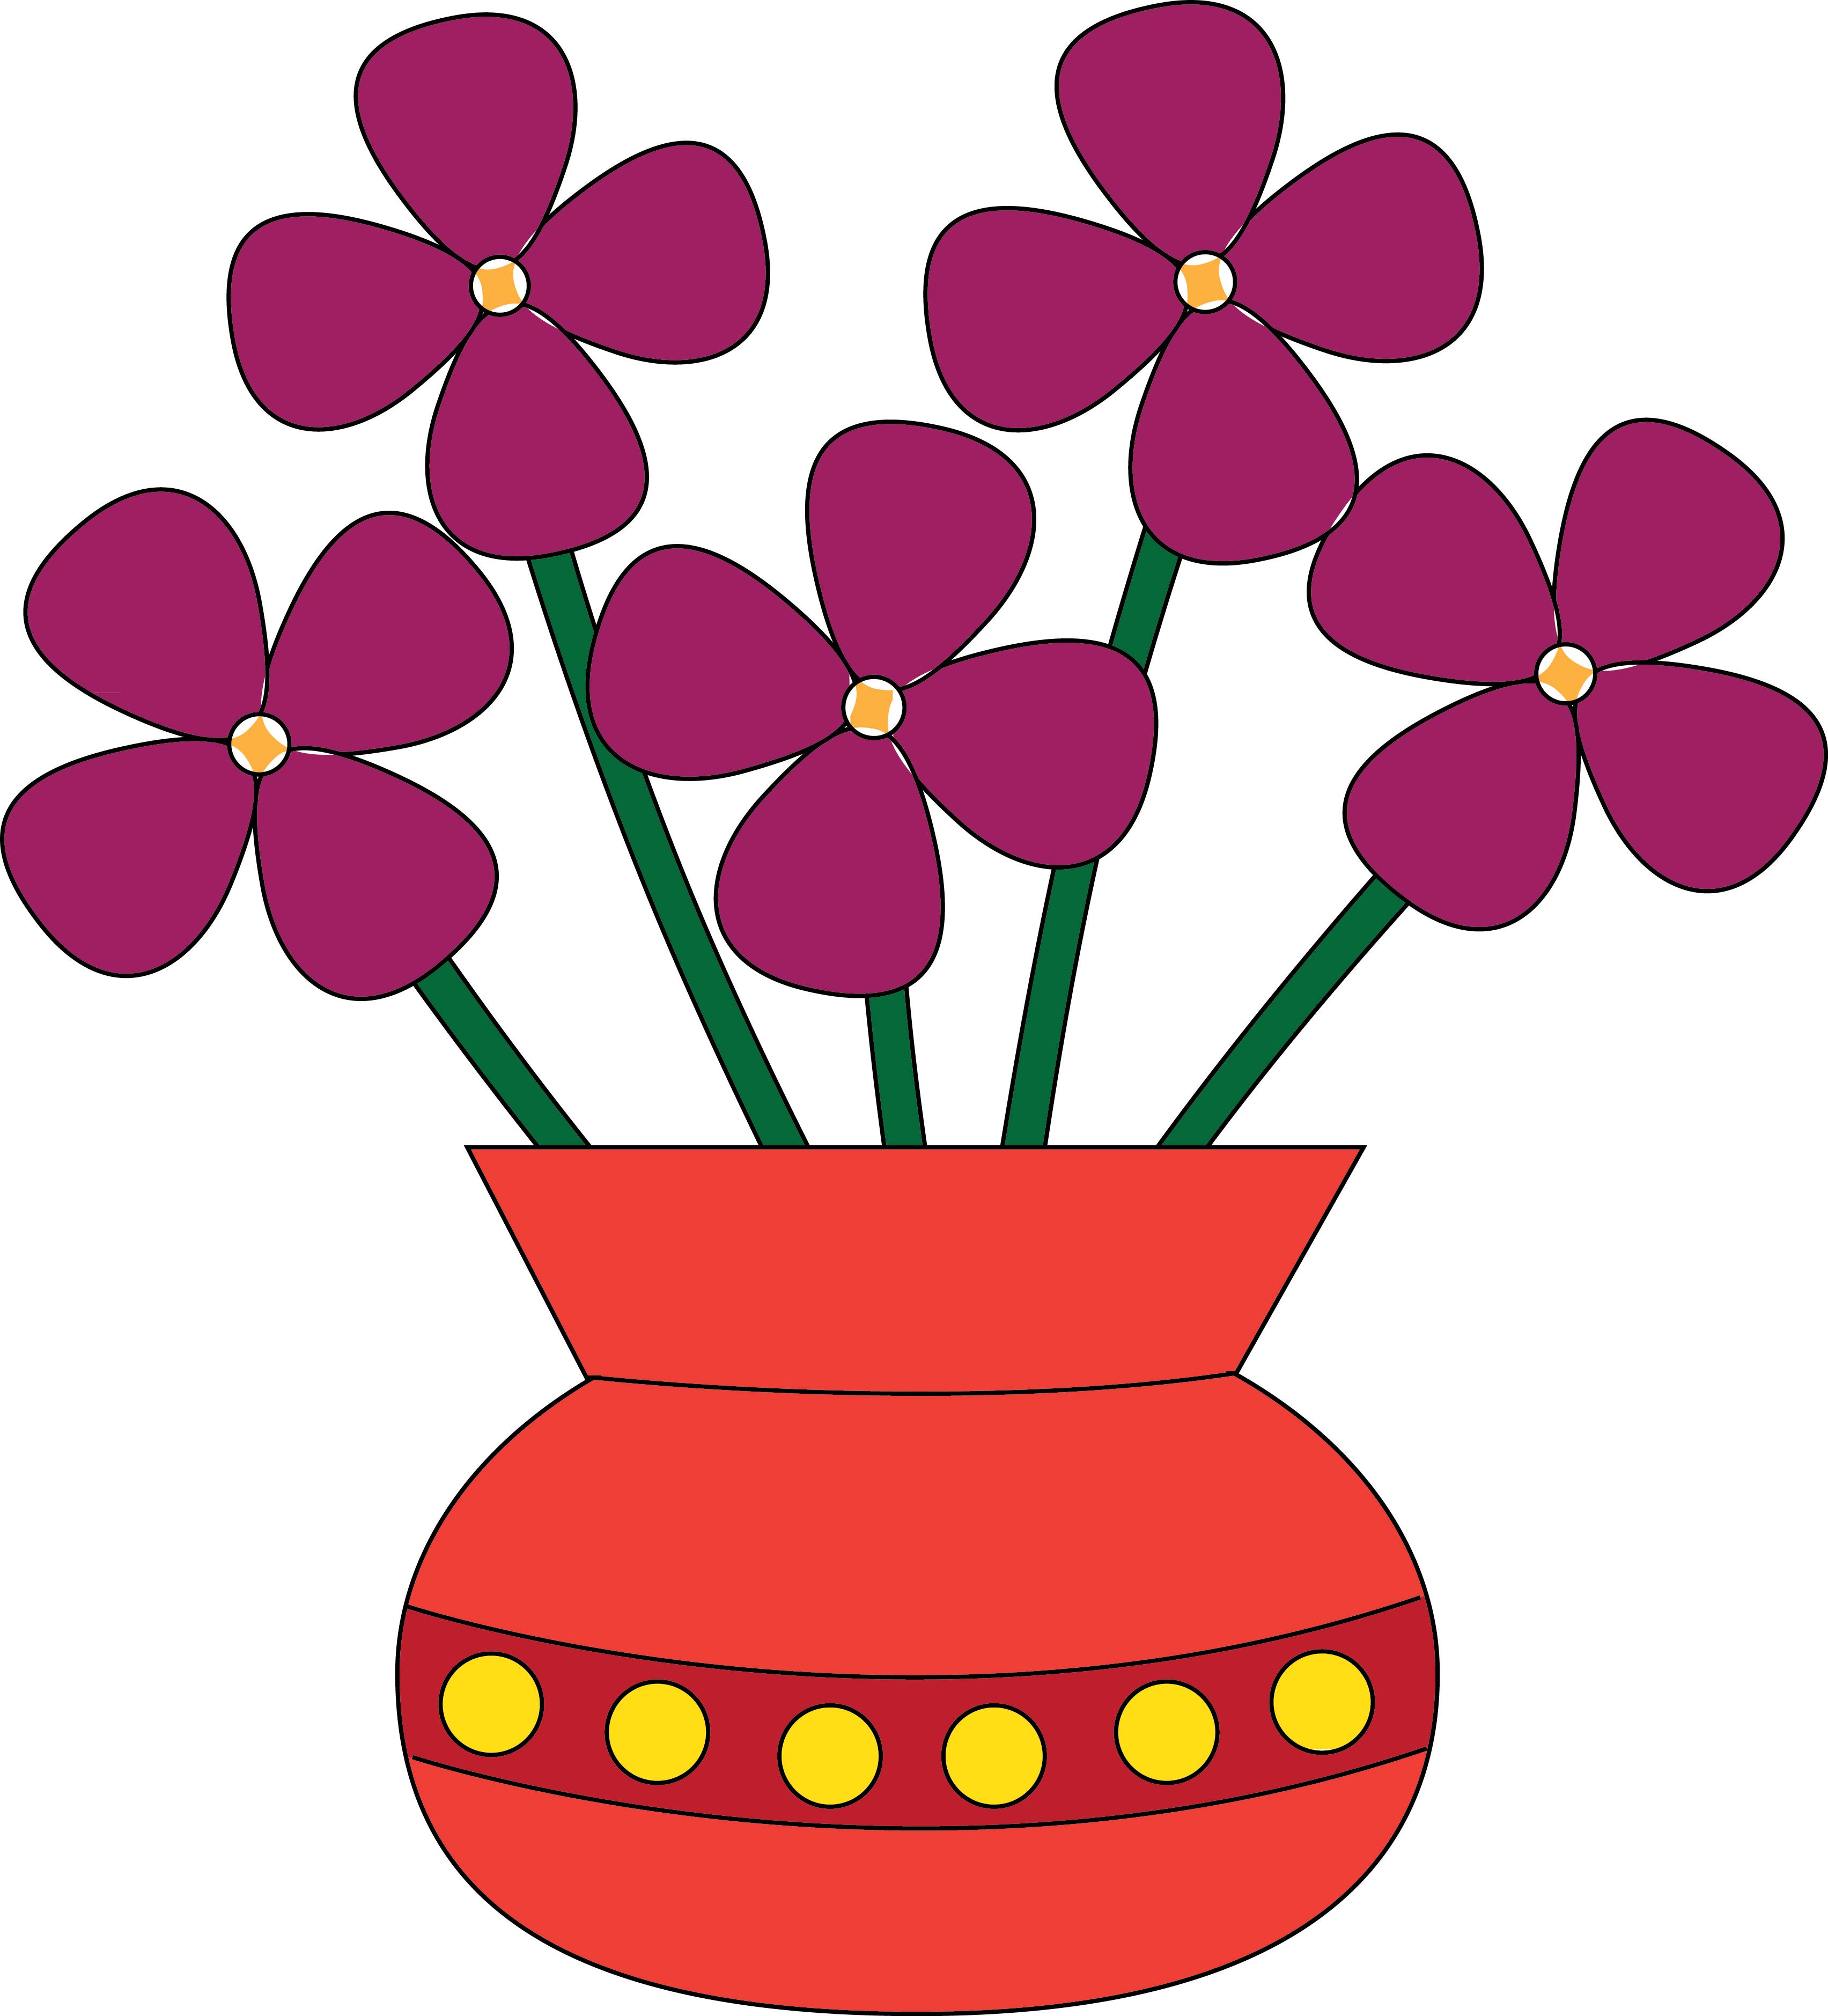 Vase Of Flowers Clipart | Clipart Panda - Free Clipart Images